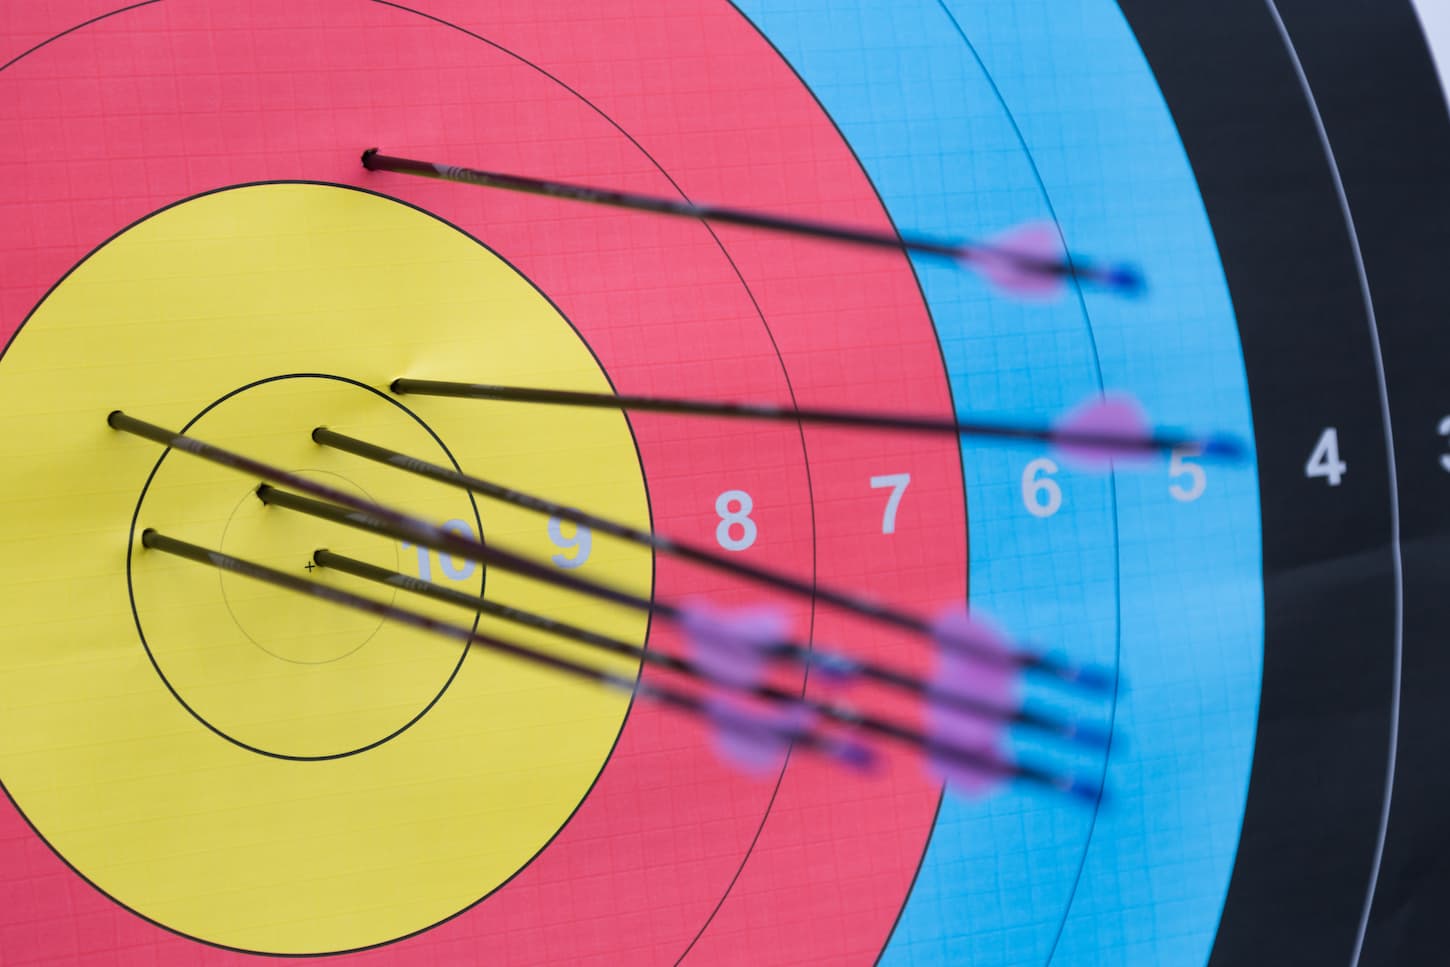 An image of Archery target with arrows on it.